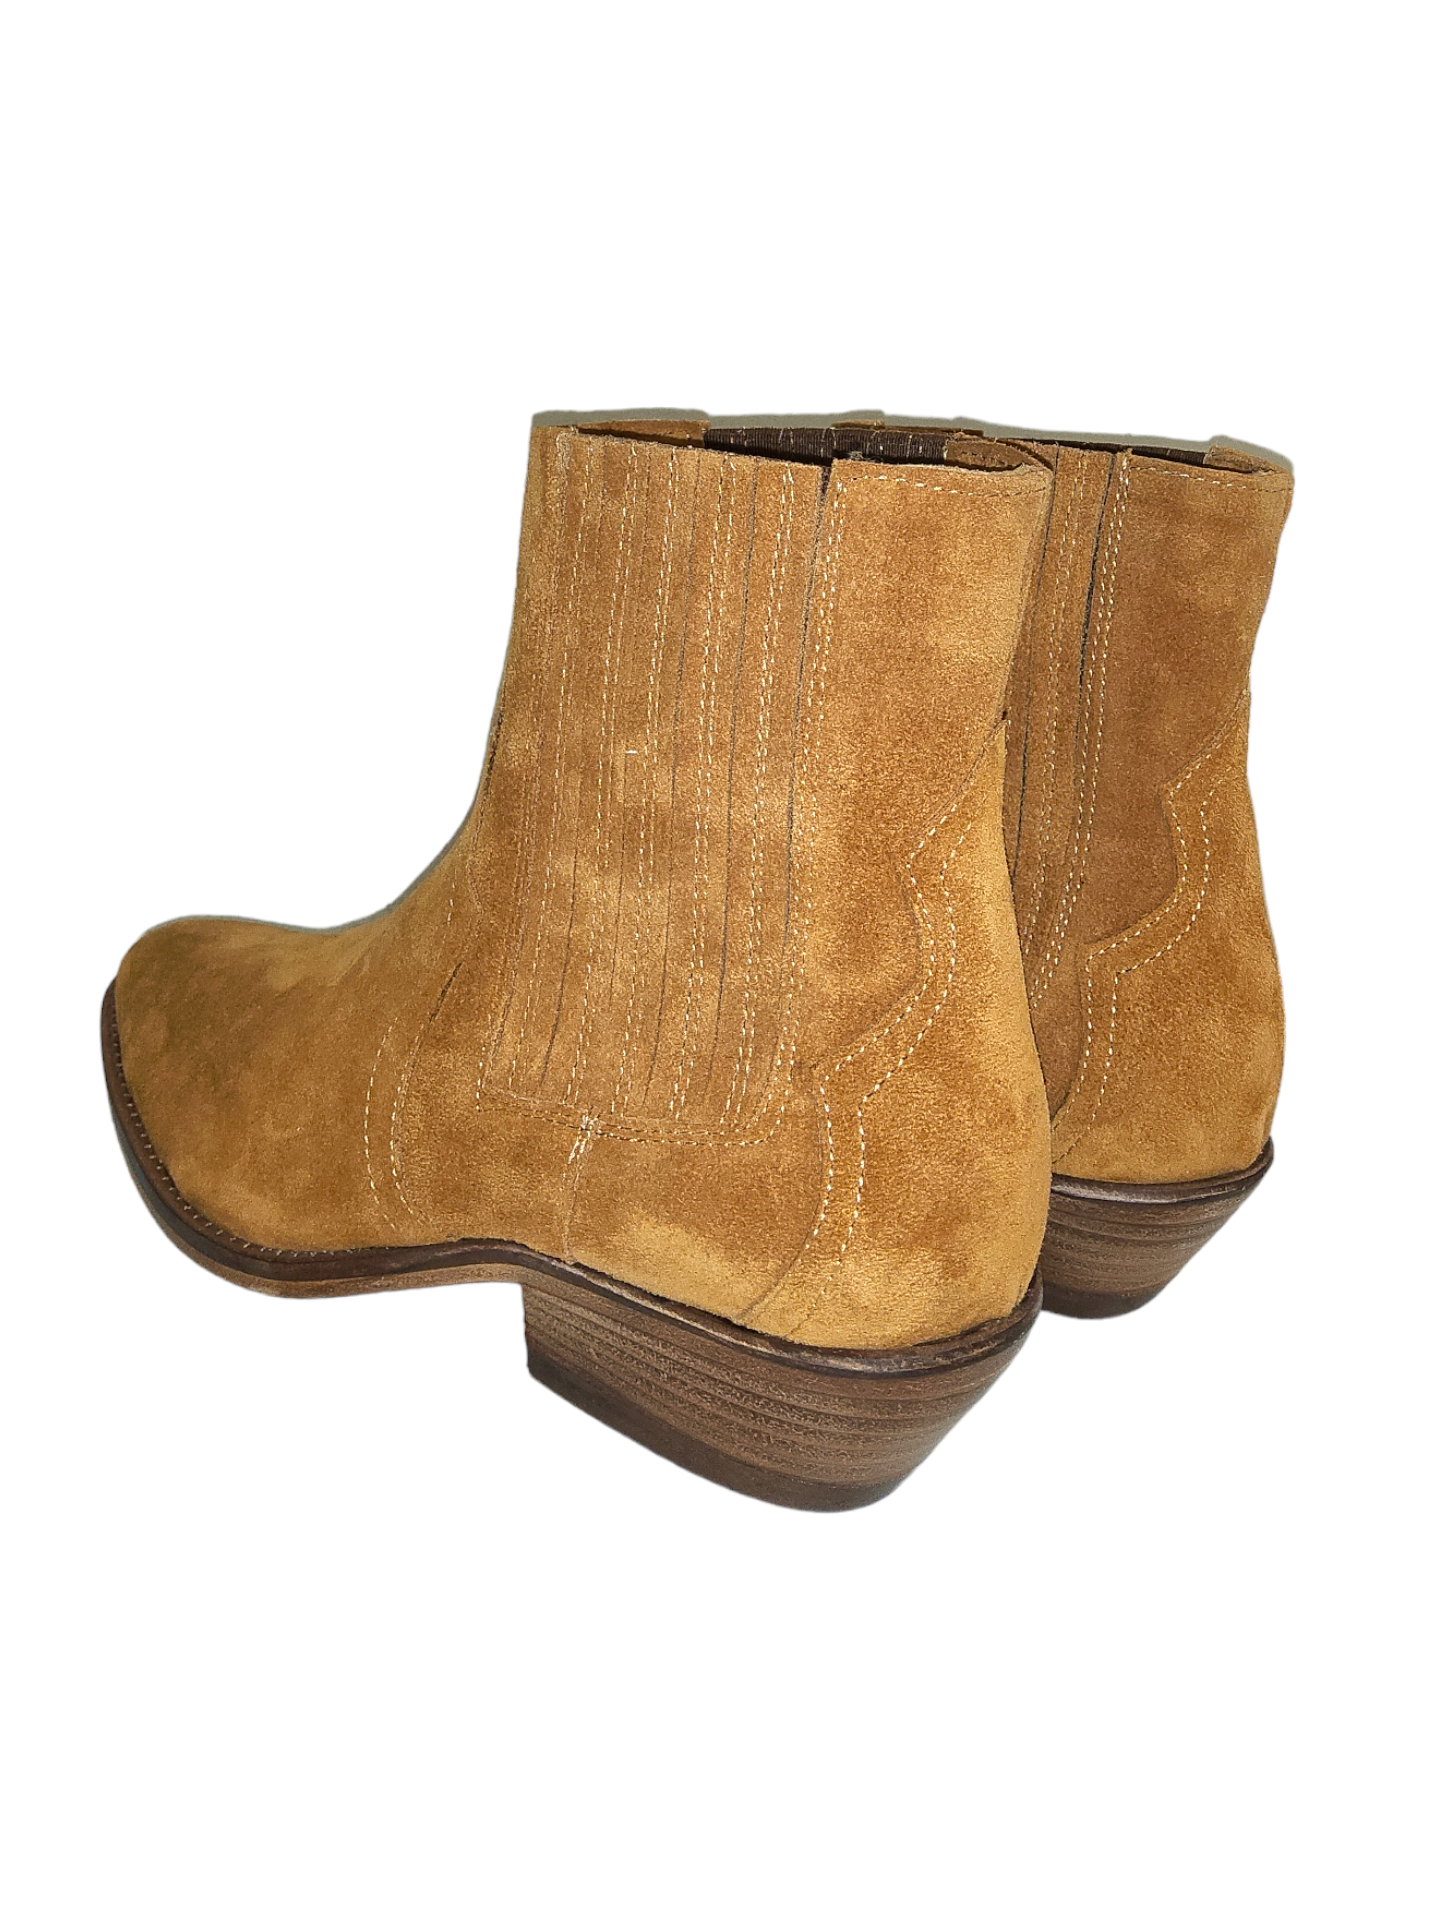 Tan leather ankle boots